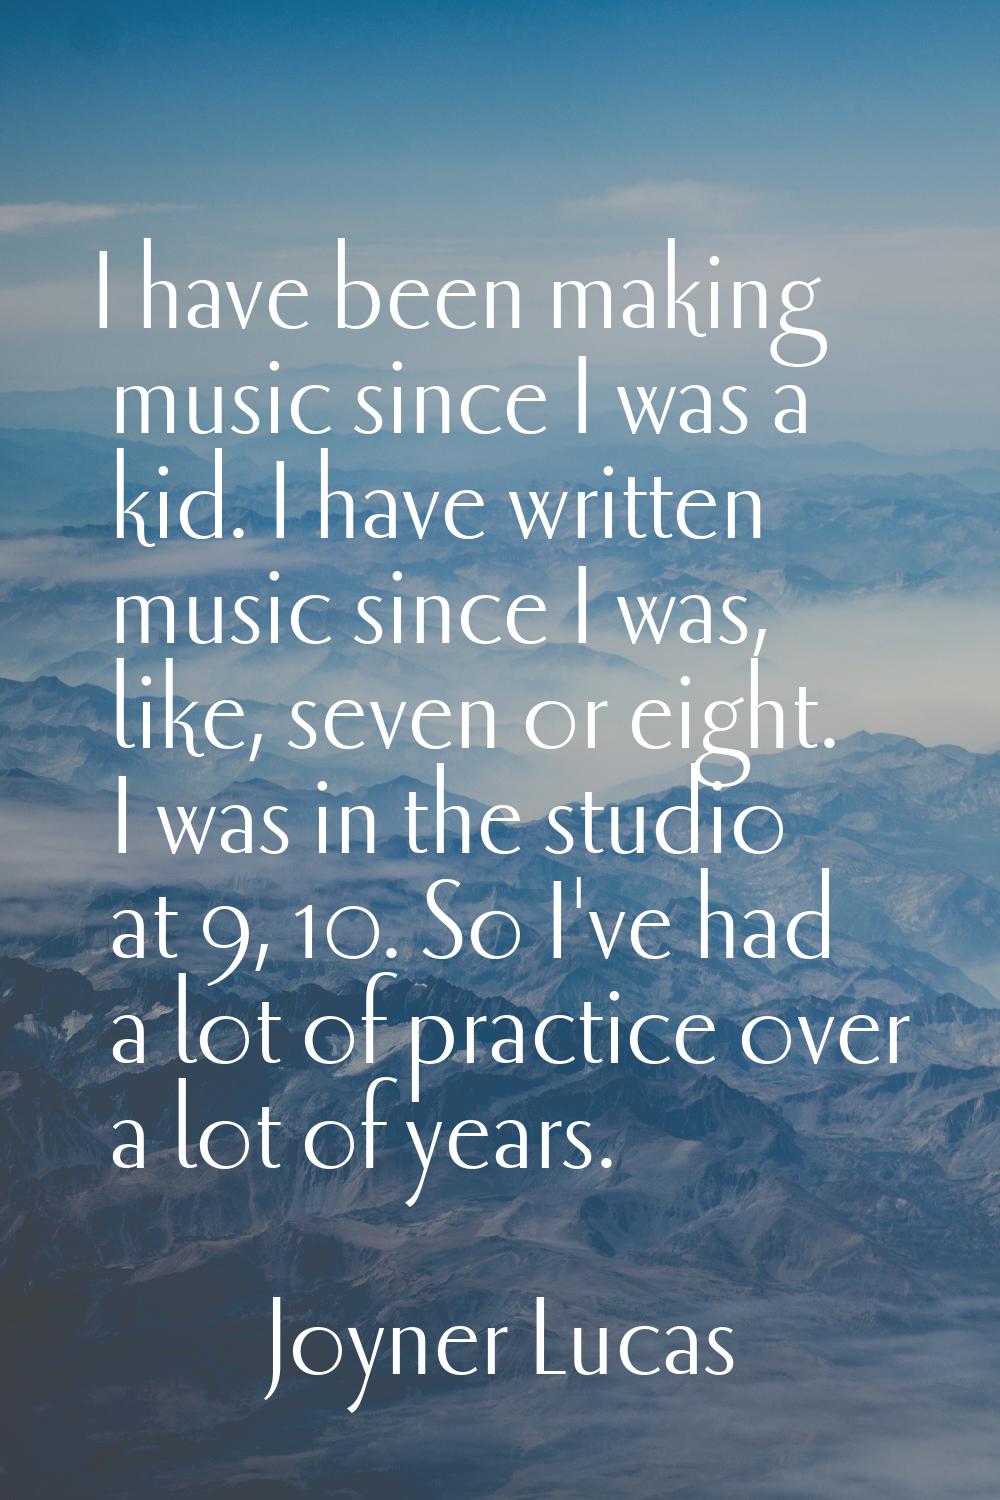 I have been making music since I was a kid. I have written music since I was, like, seven or eight.